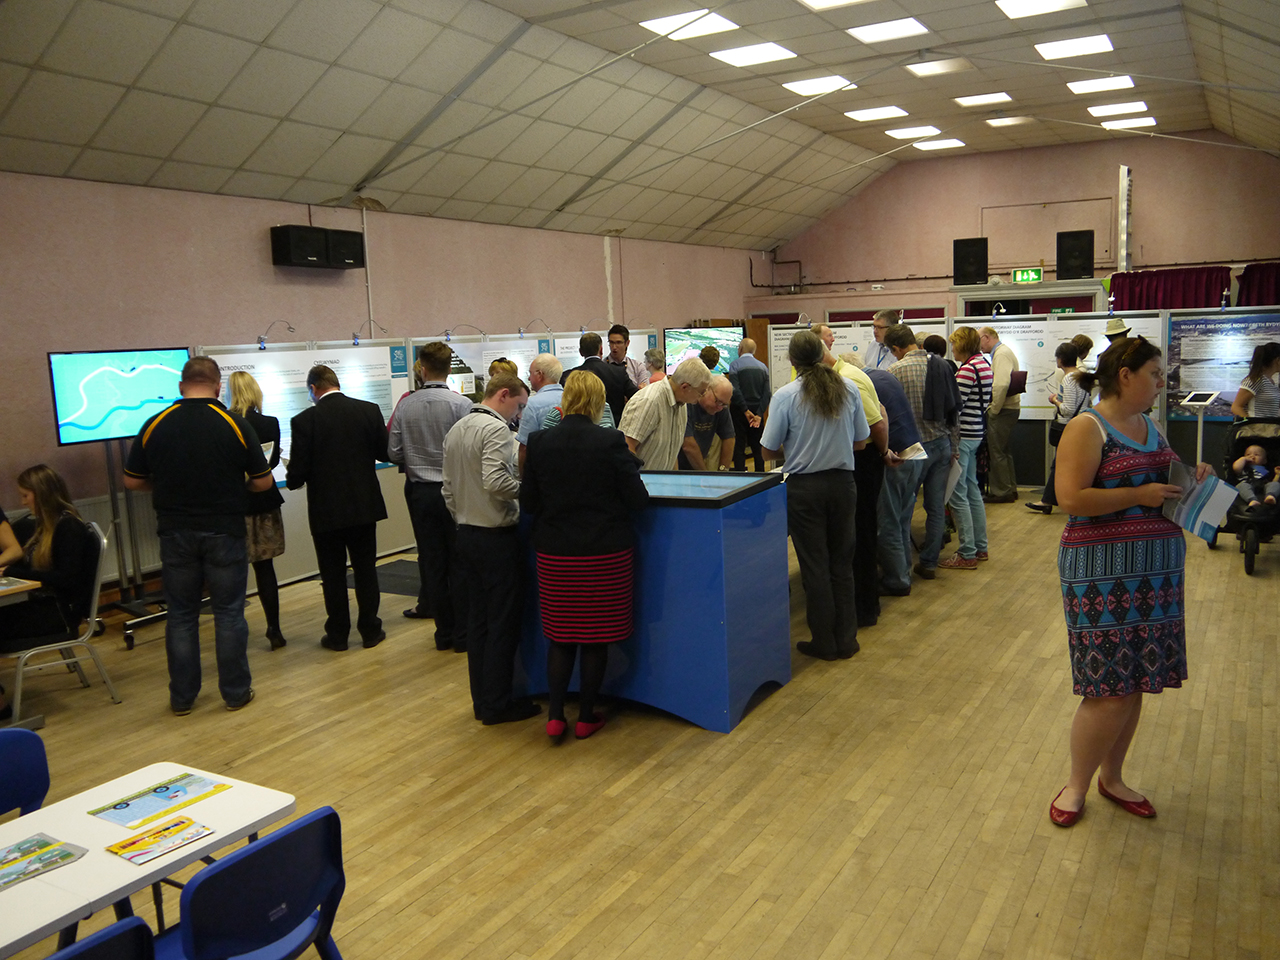 Welsh Motorway Exhibition Pulls In The Crowds